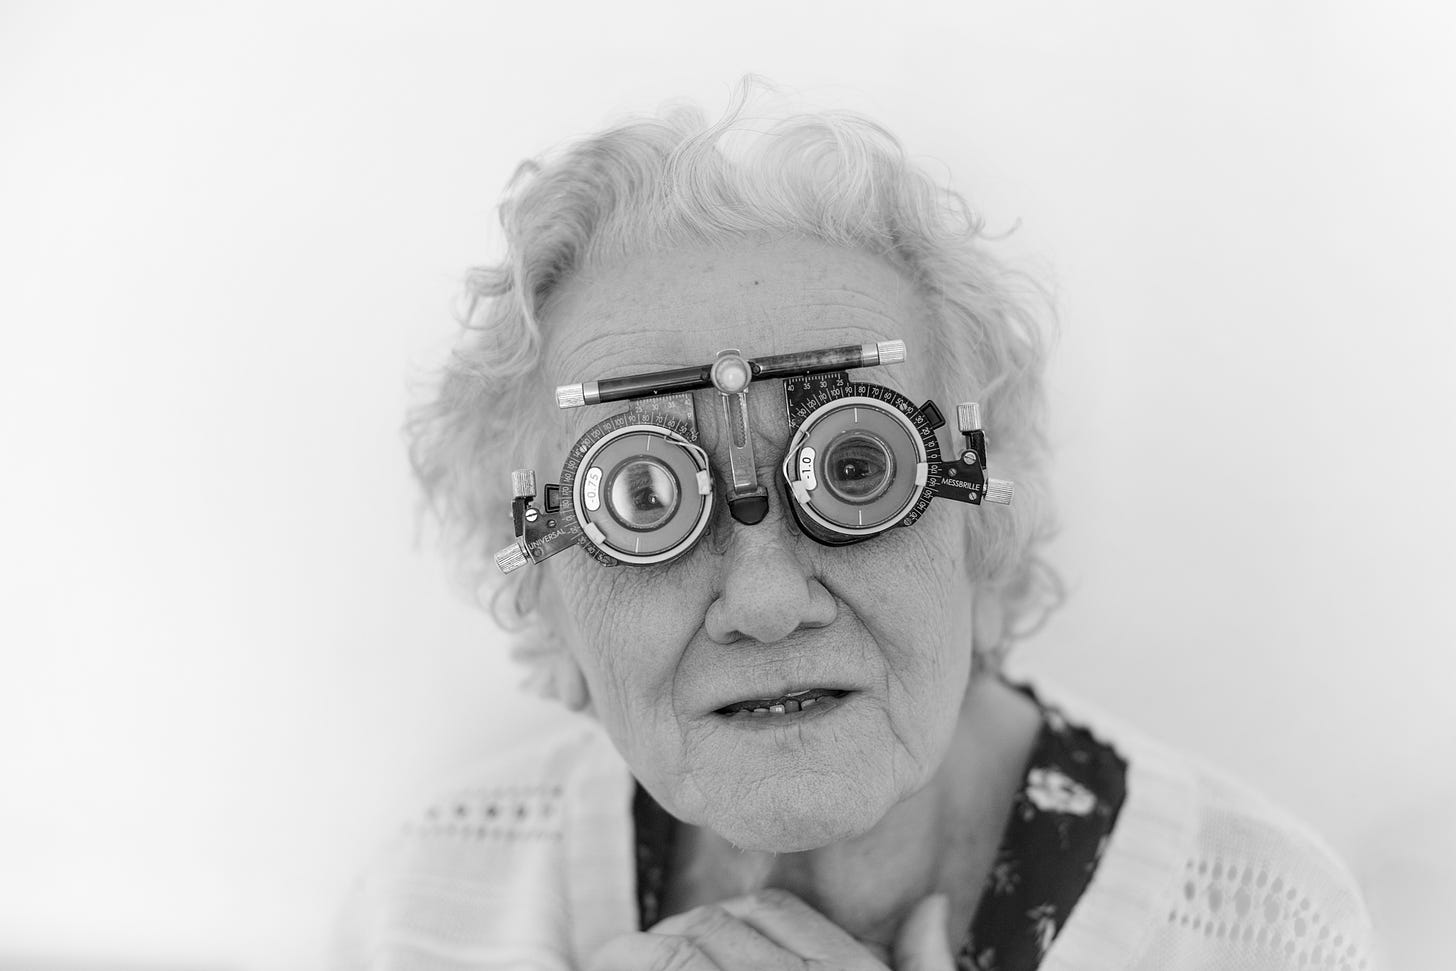 An elderly looking lady looks at the camera wearing a very strange pair of glasses designed to help test eyesight.